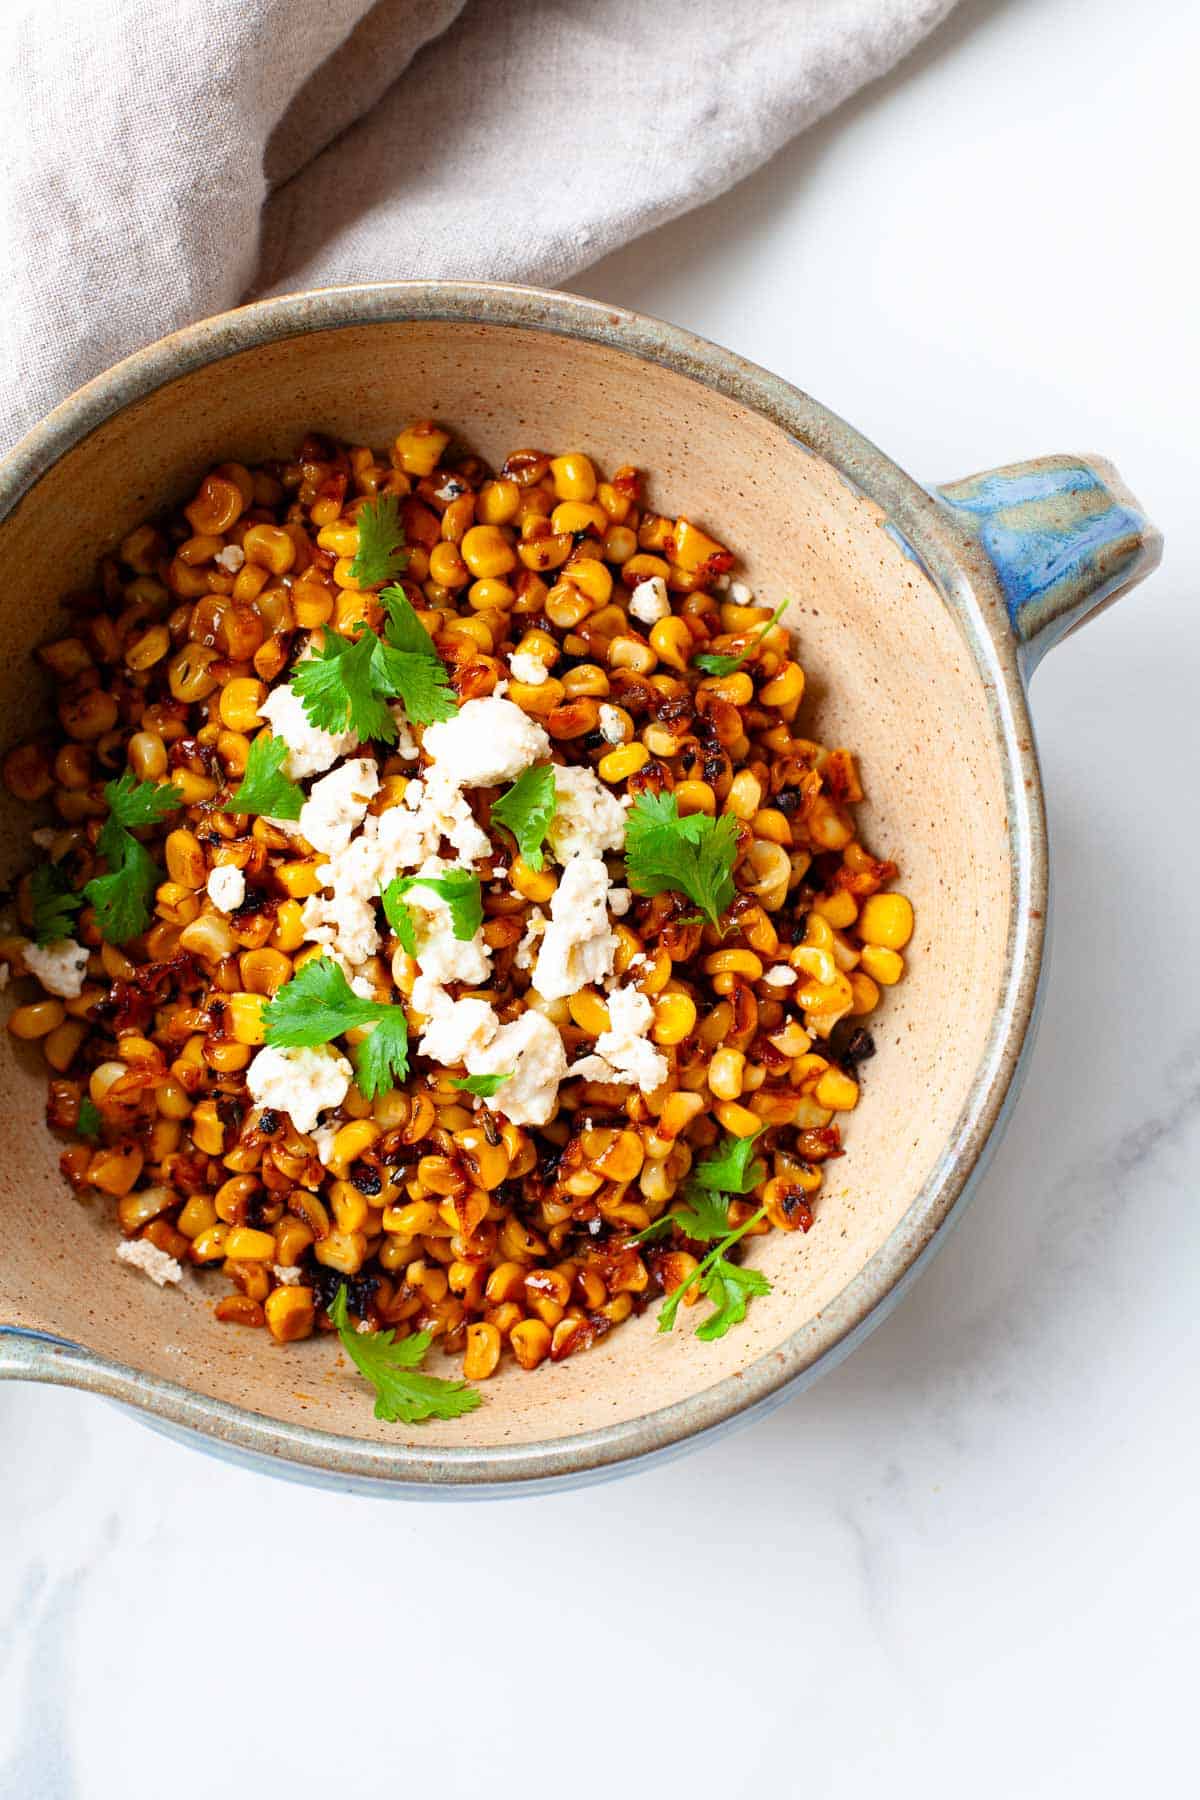 blackened corn in a blue and tan bowl garnished with cilantro and crumbled feta